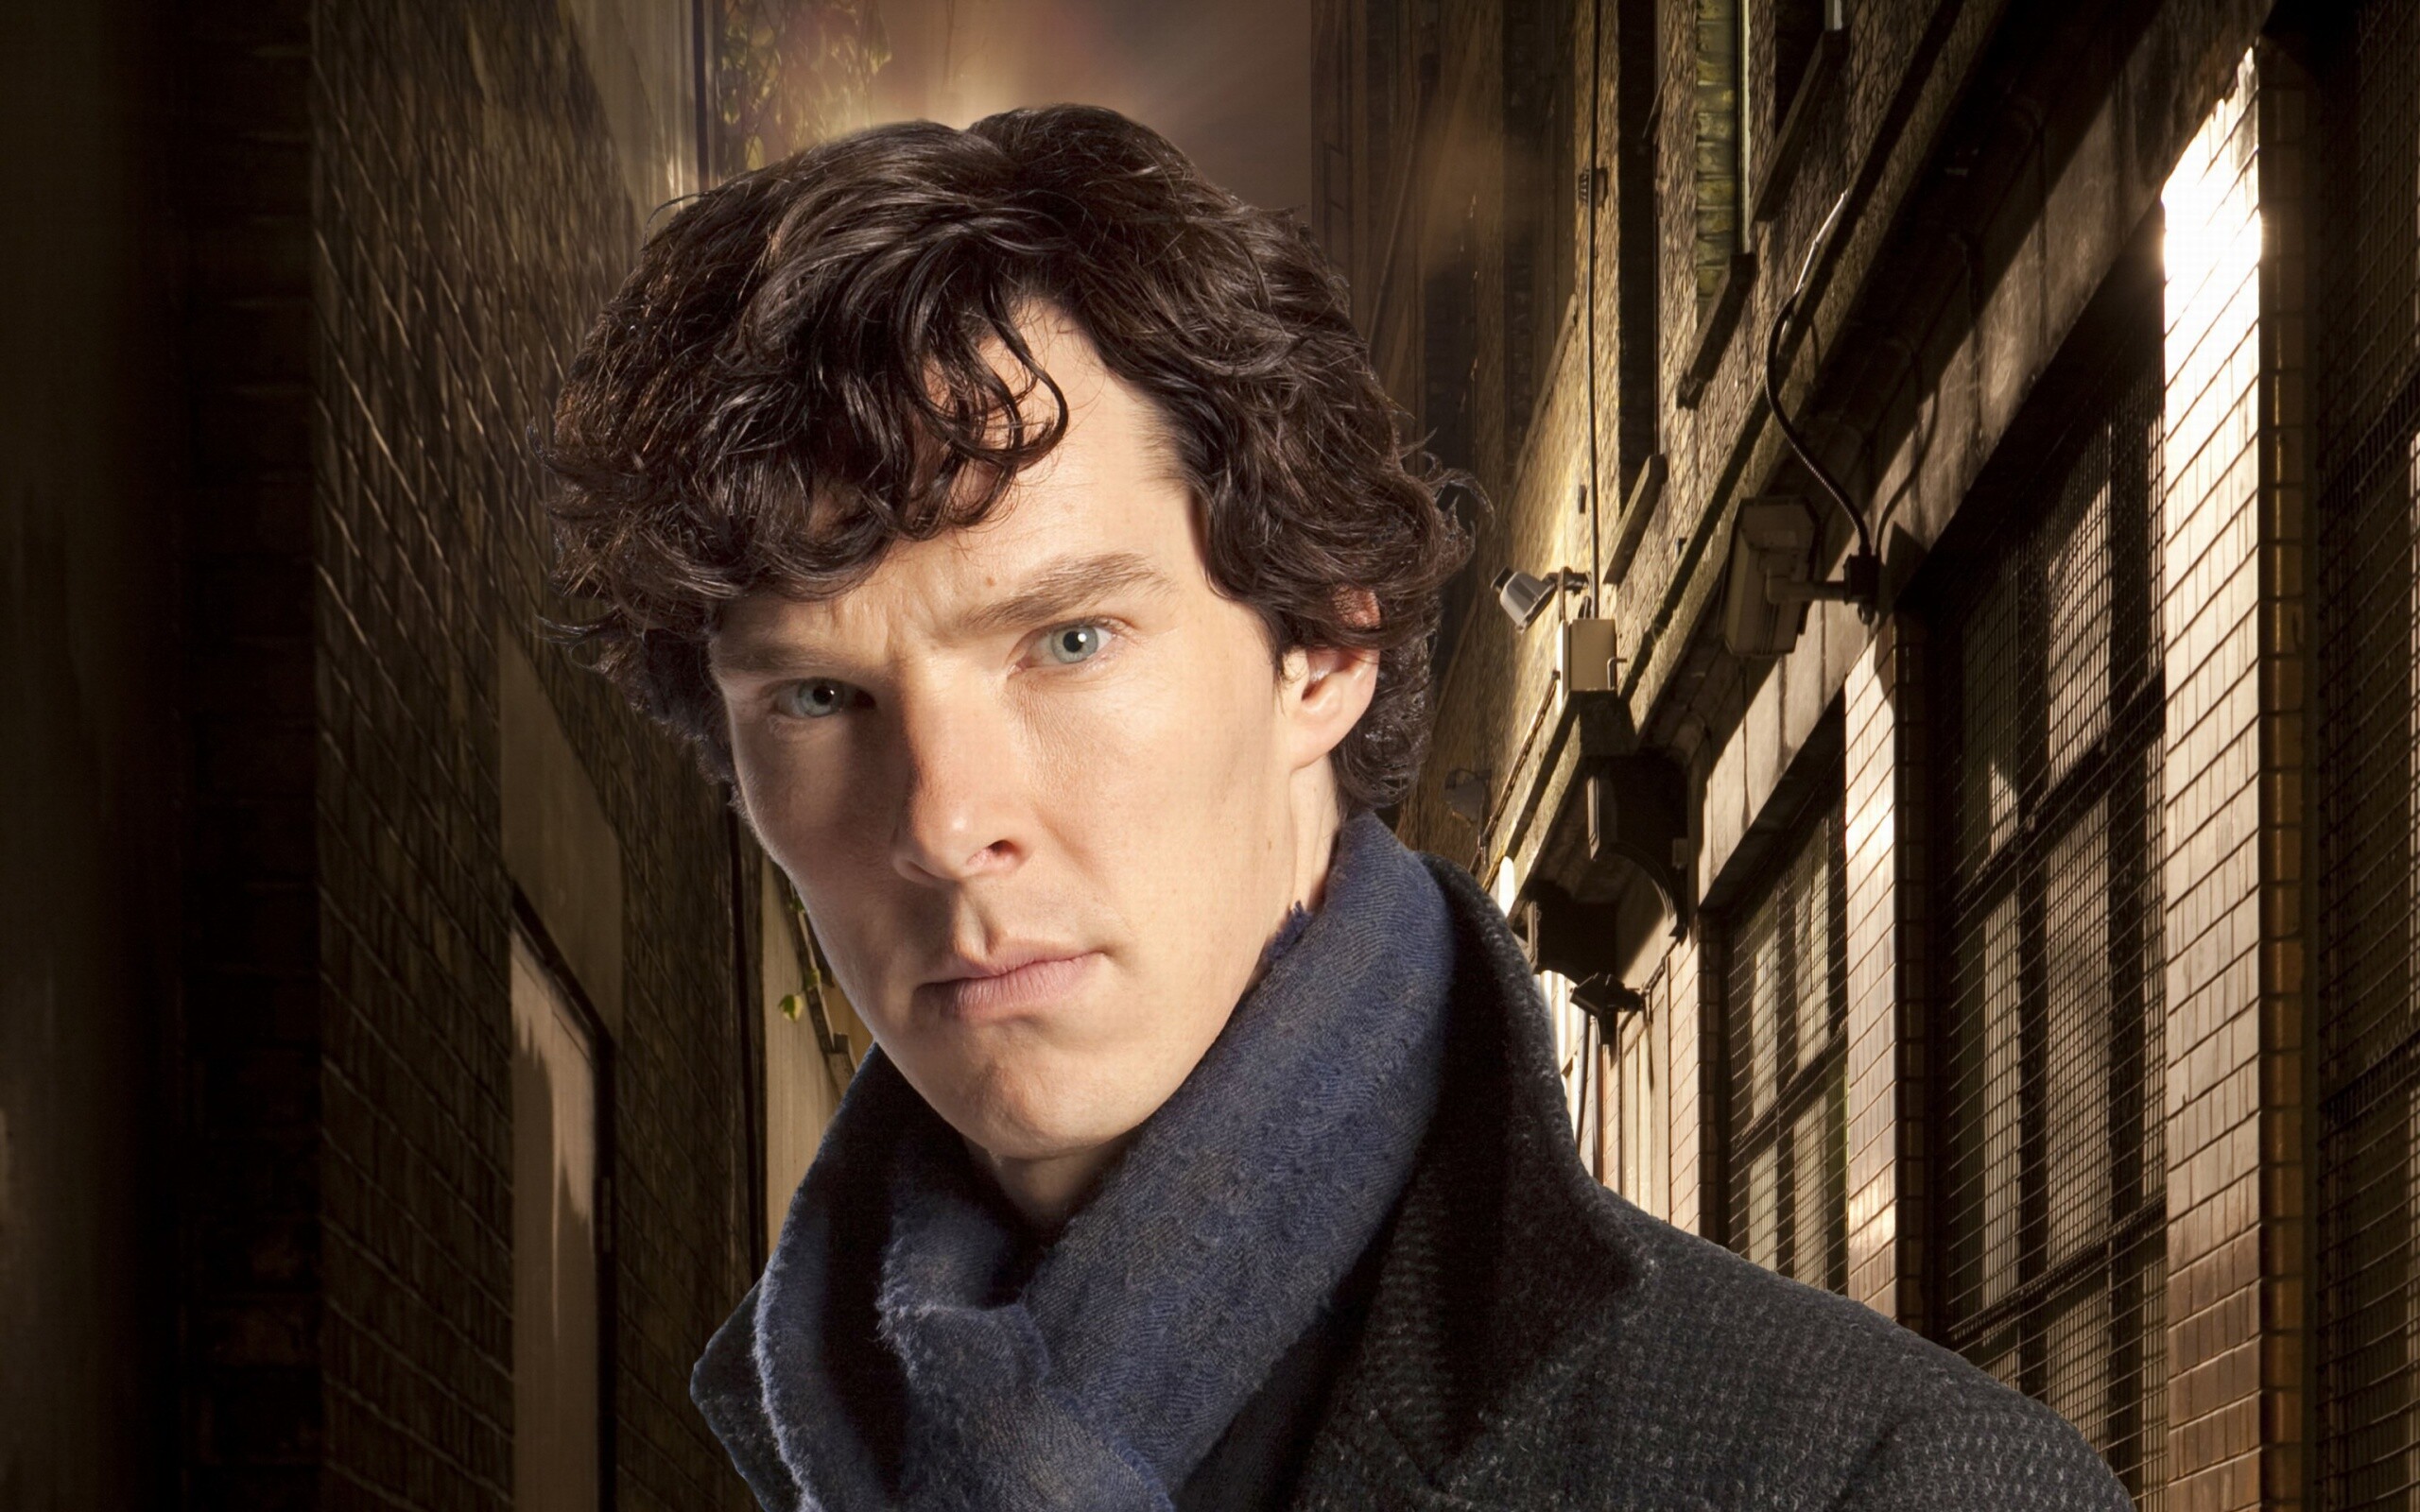 Sherlock (TV Series): Holmes, A fictional detective created by British author Arthur Conan Doyle. 2560x1600 HD Background.